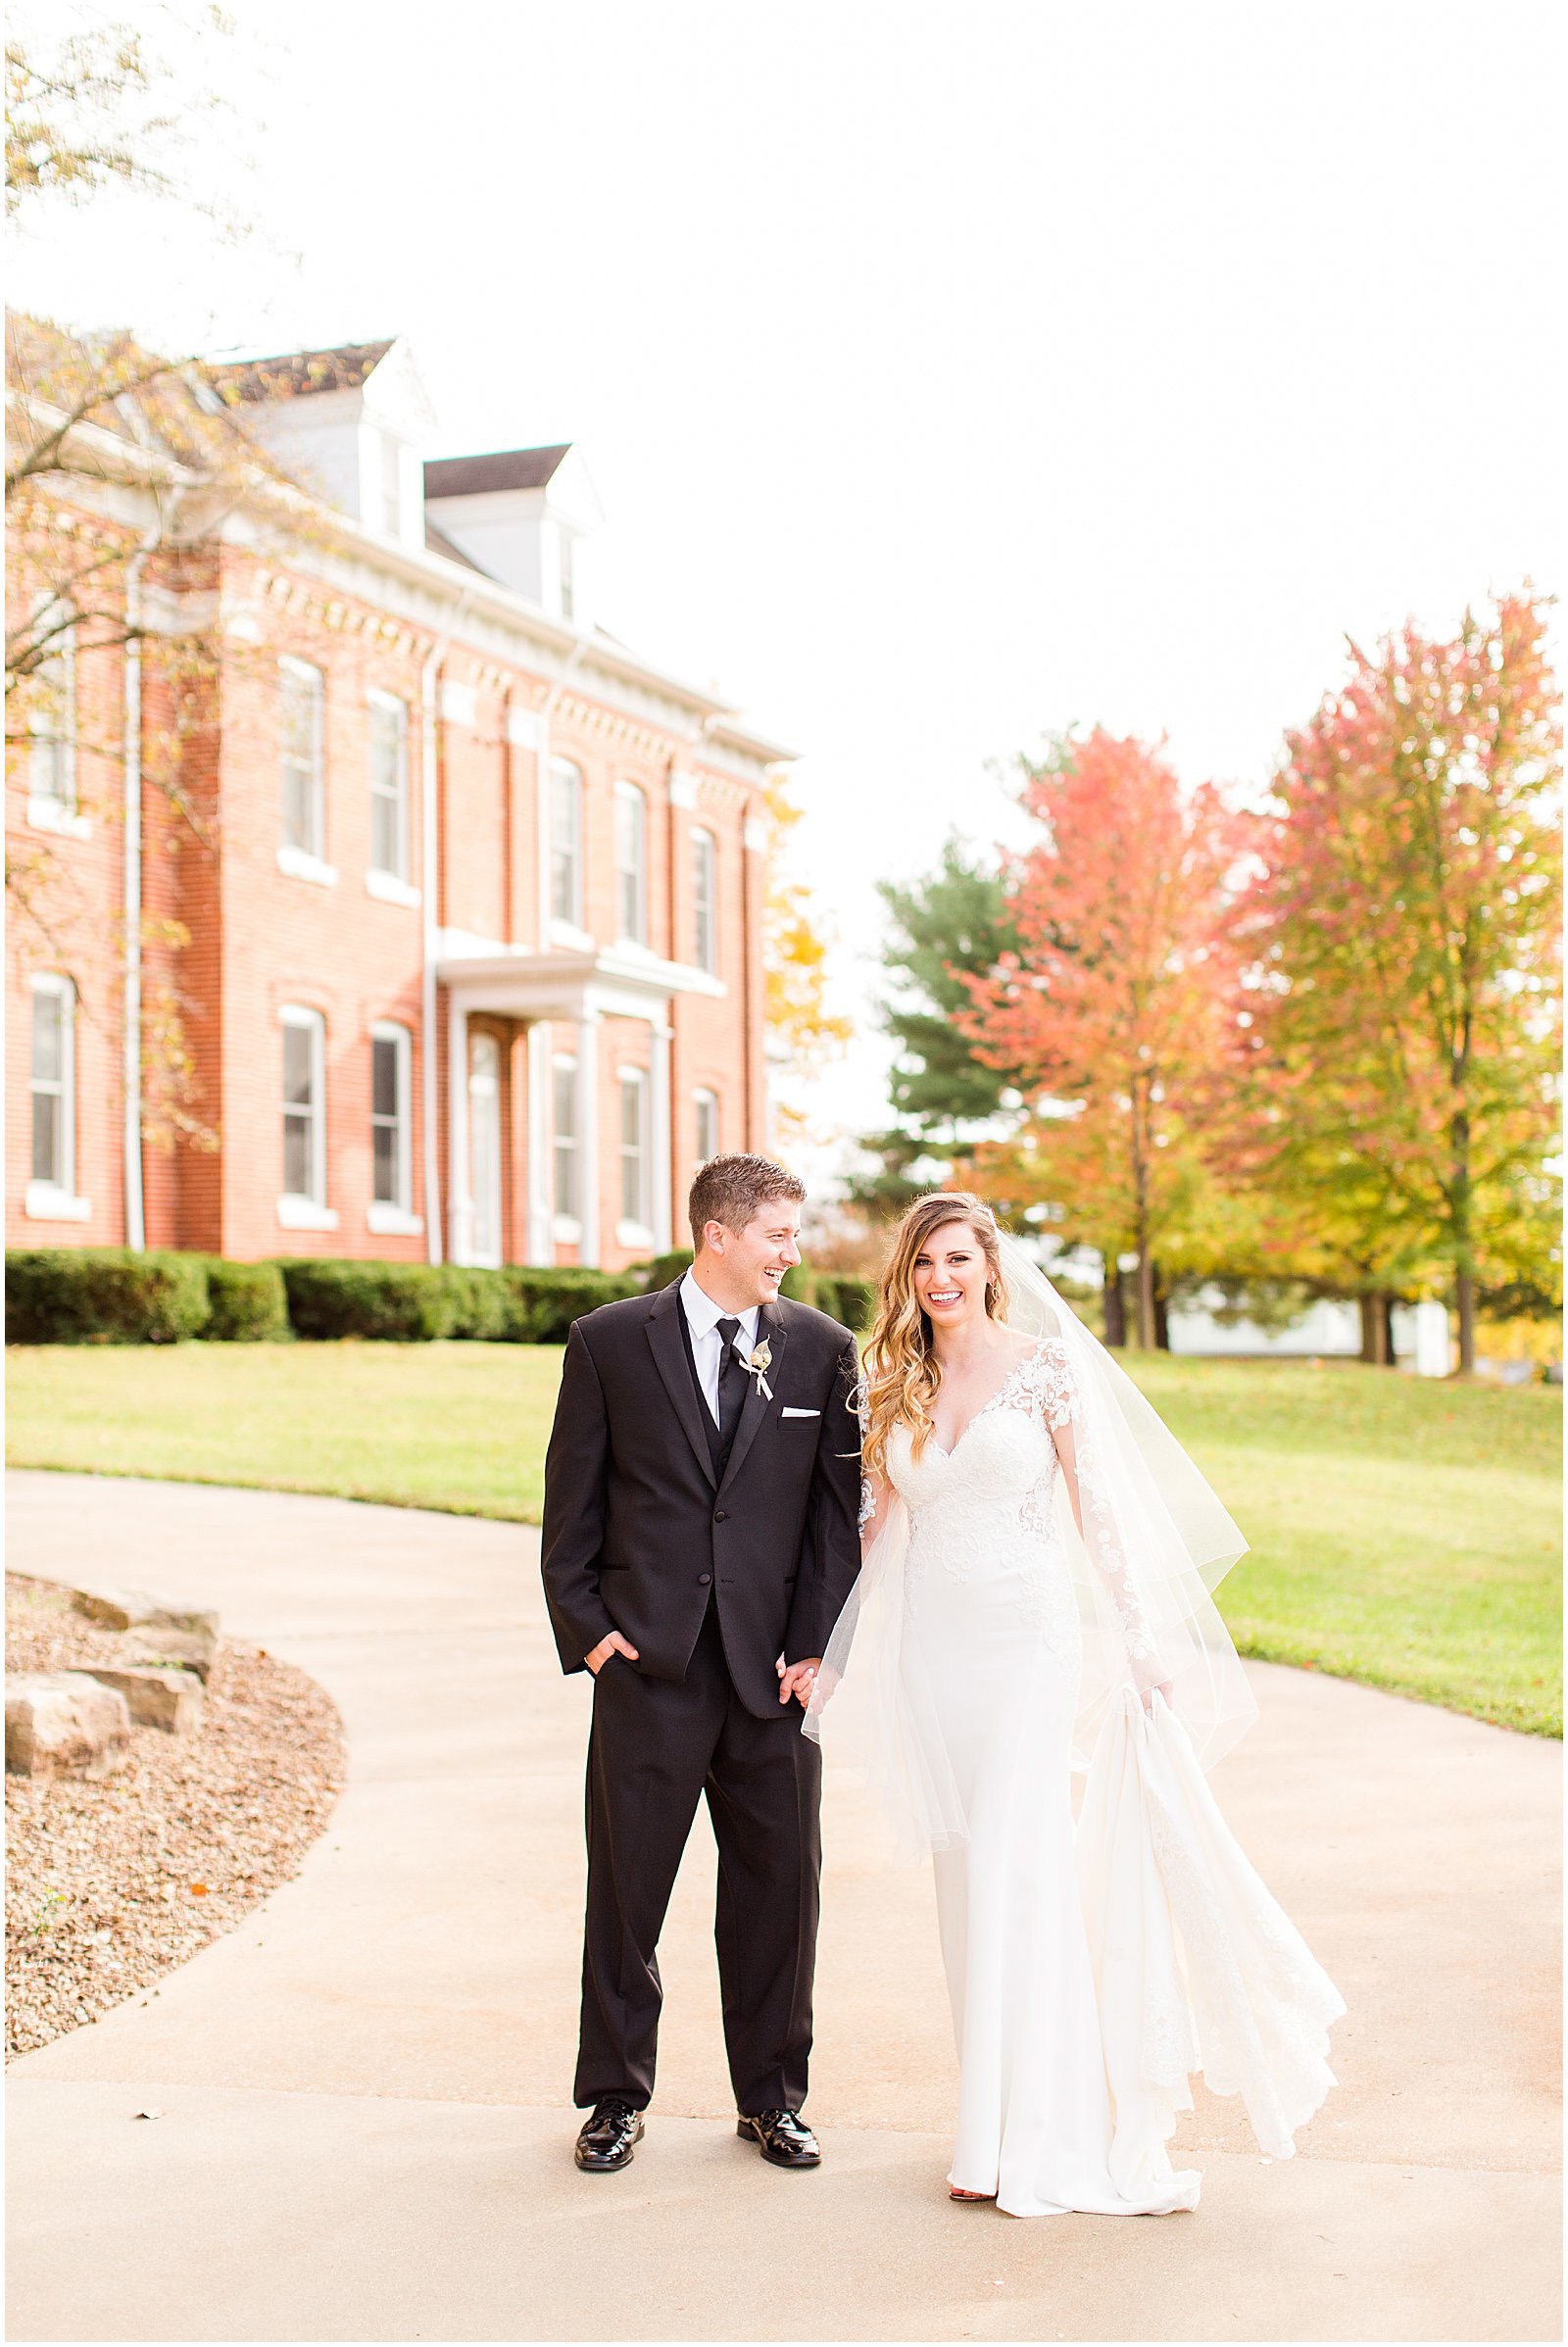 A Romantic Fall Wedding in Ferdinand, IN | Tori and Kyle | Bret and Brandie Photography 0118.jpg